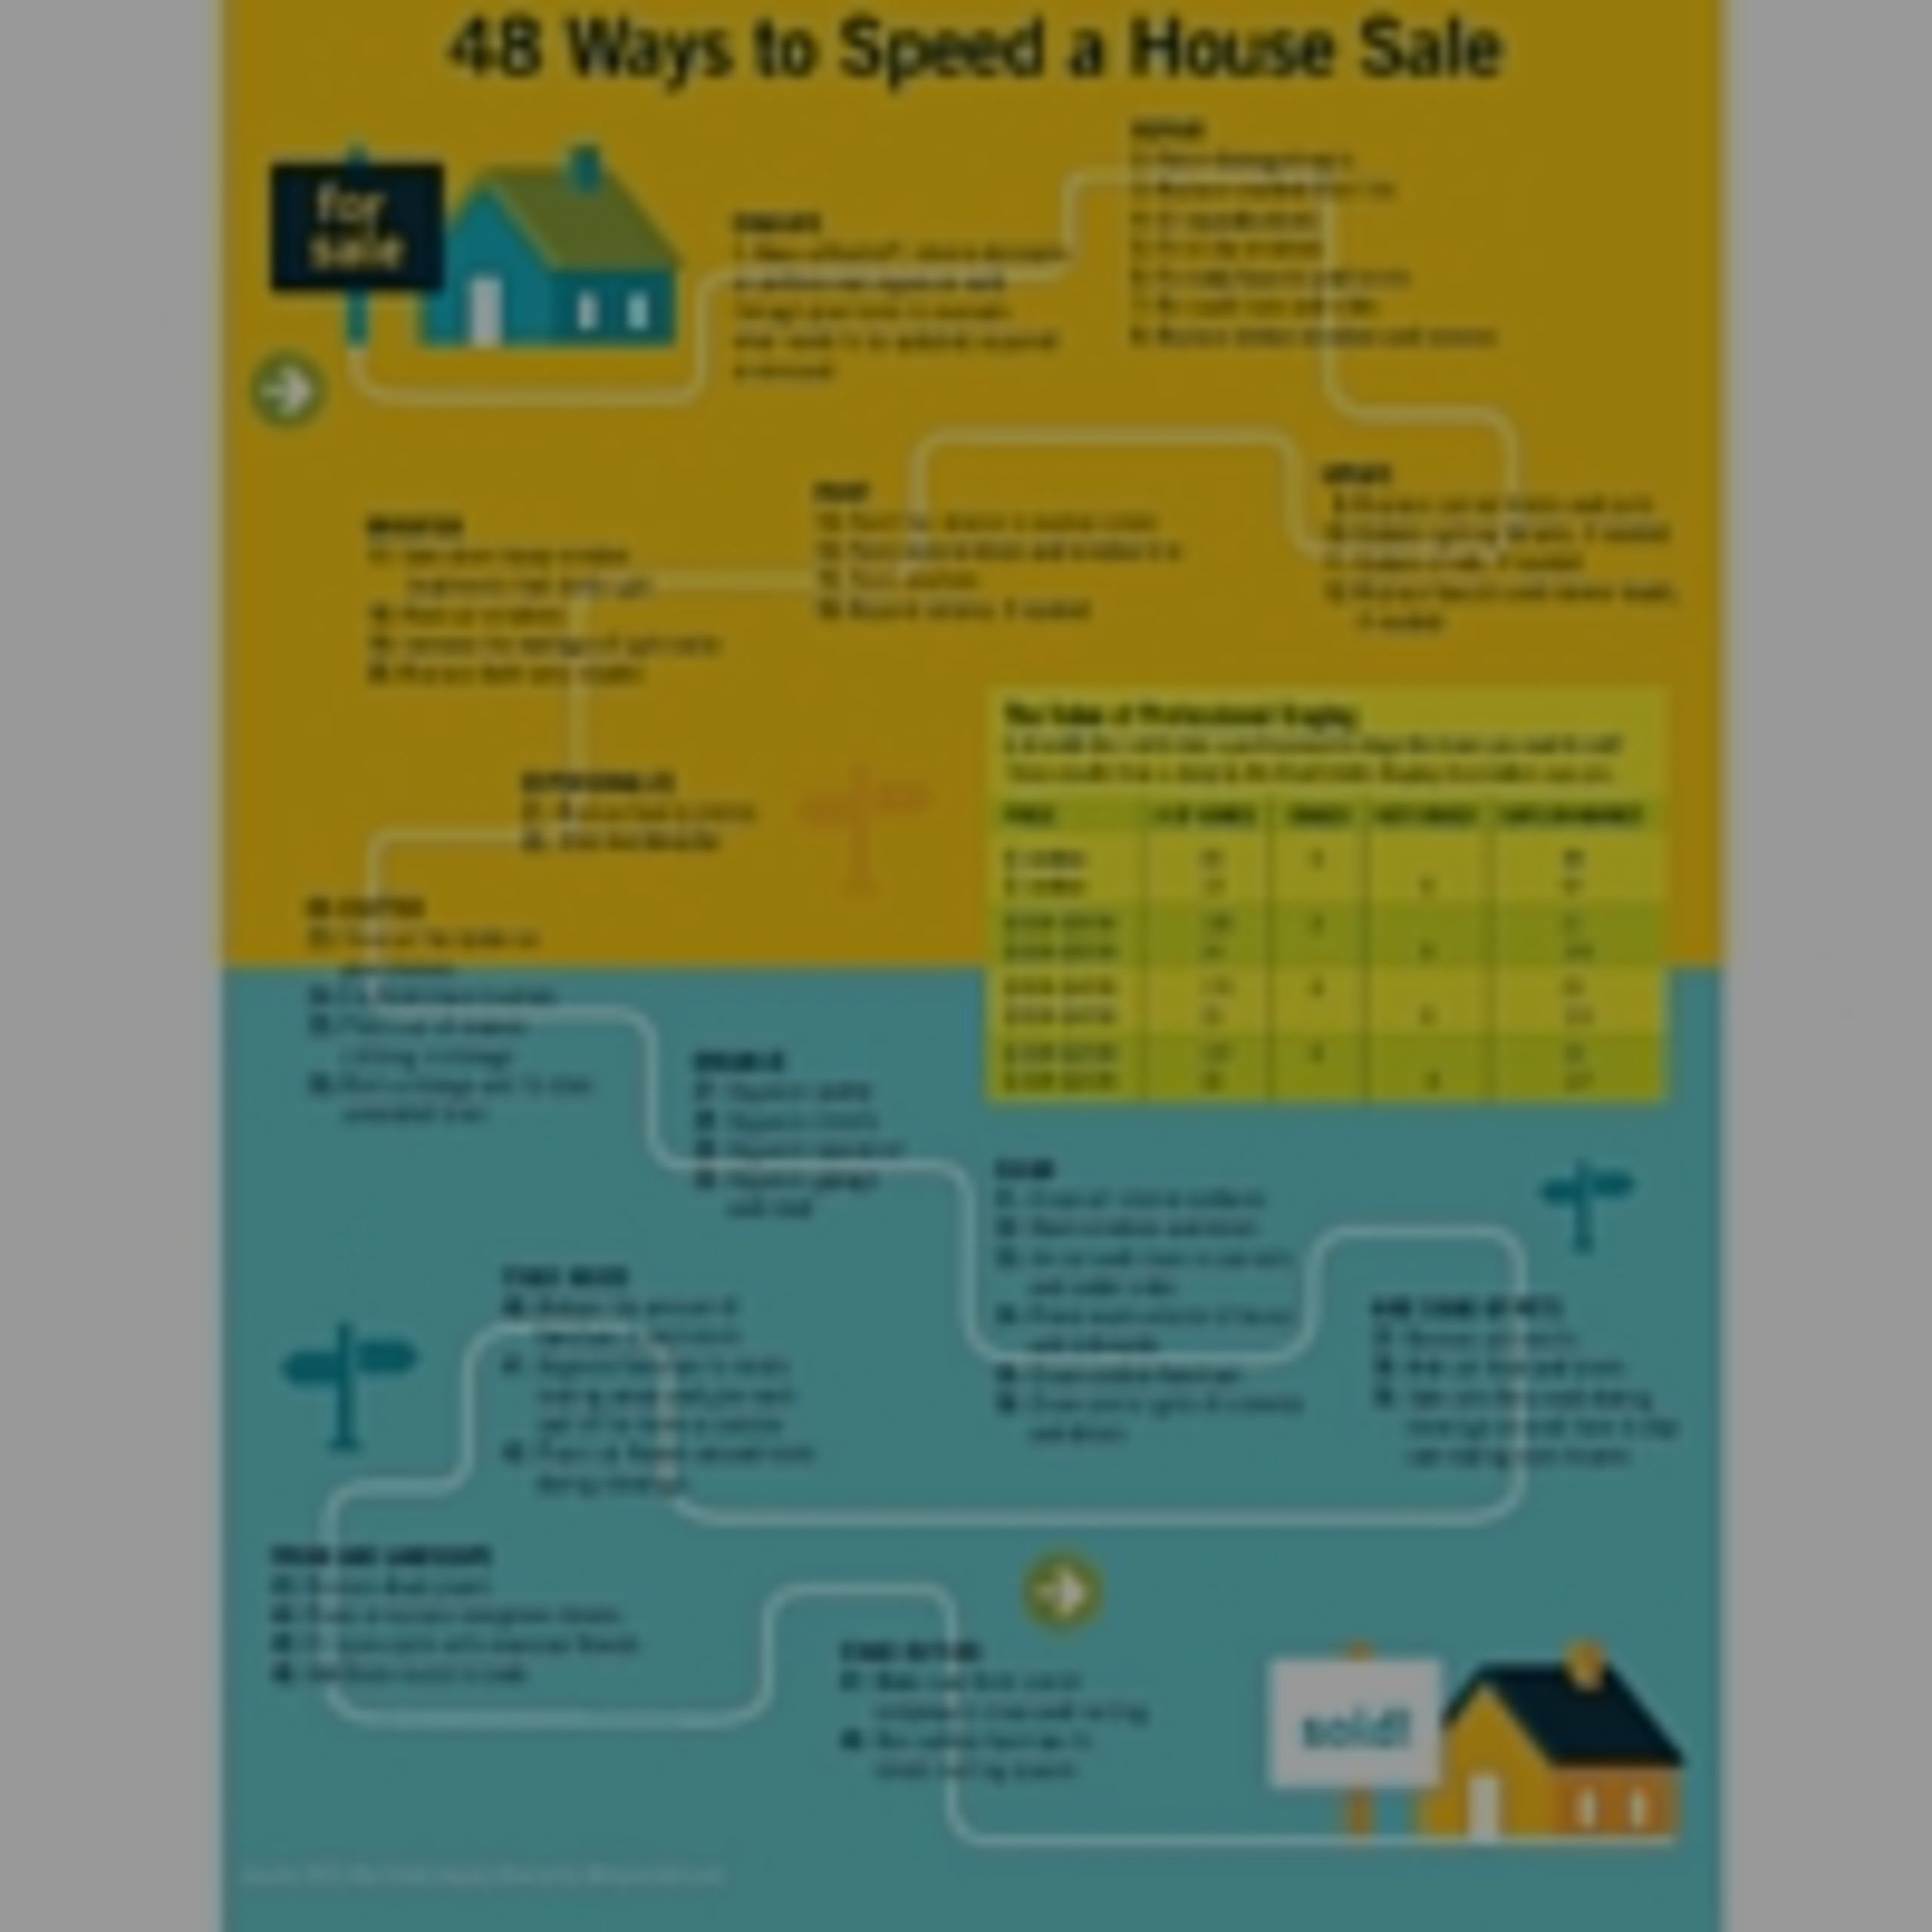 48 Ways to Speed a House Sale